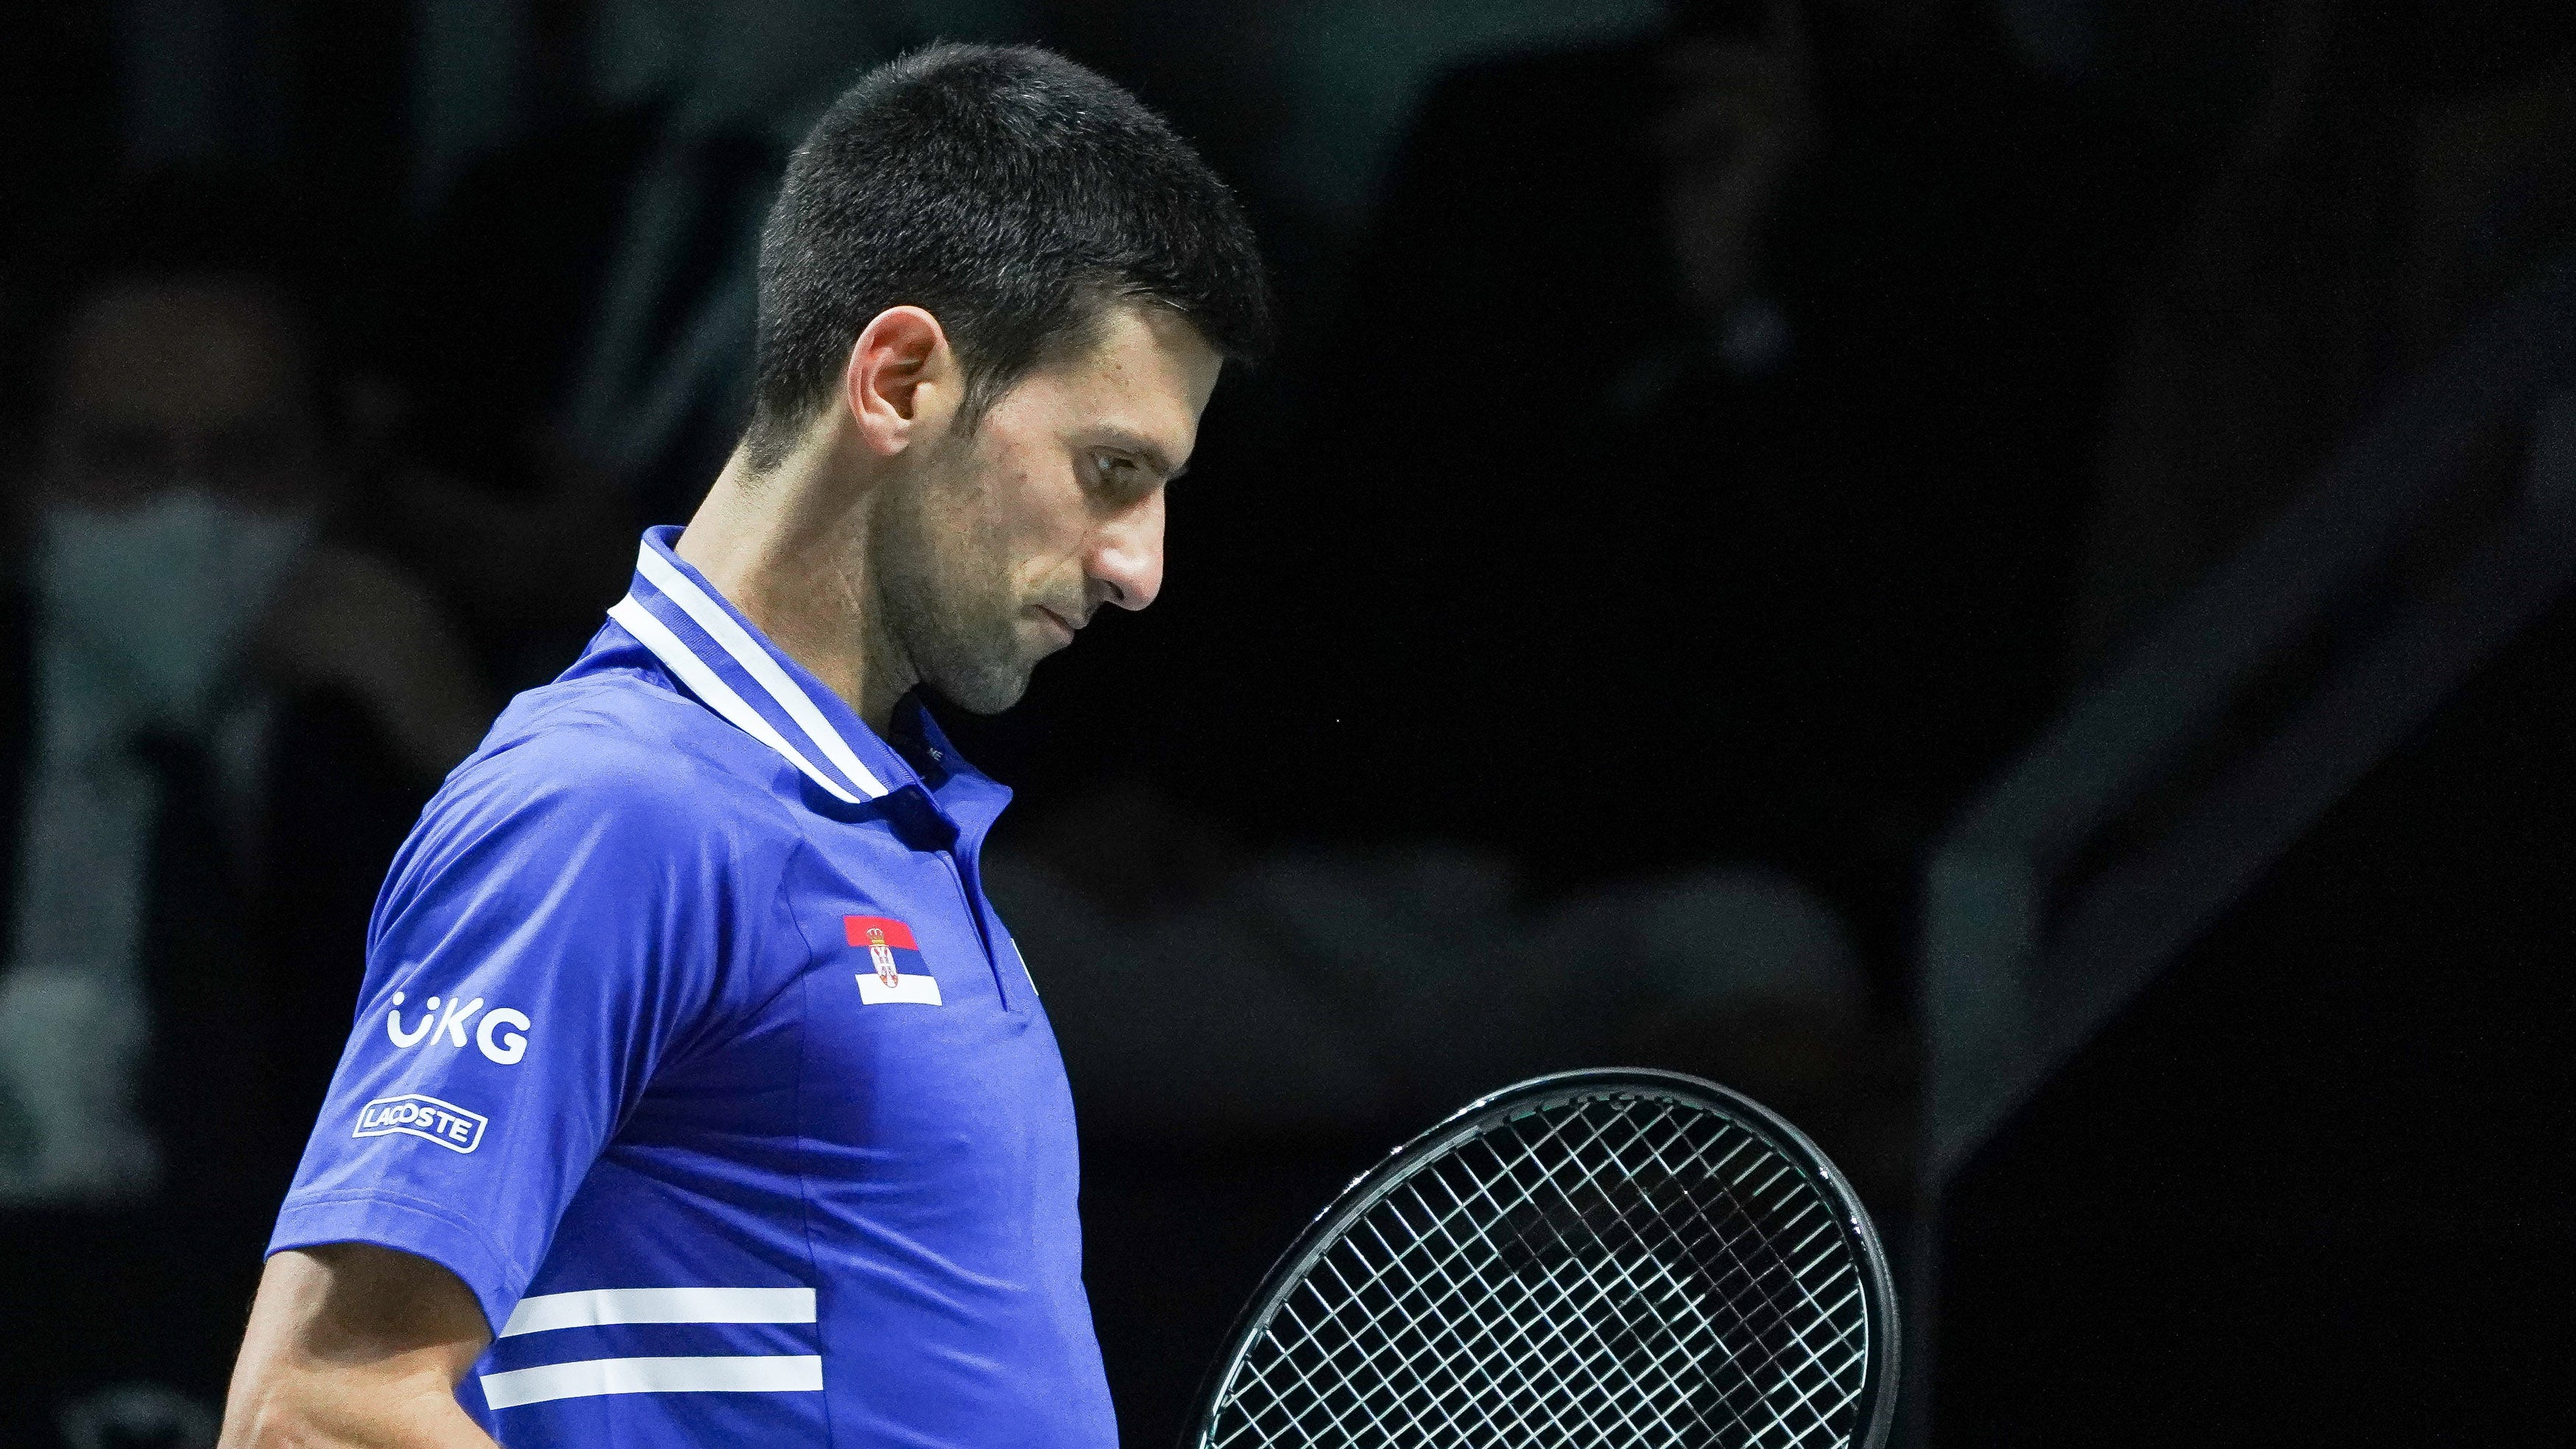 Novak Djokovic leaves Australia ‘extremely disappointed,’ ‘uncomfortable’ with Australian Open focus